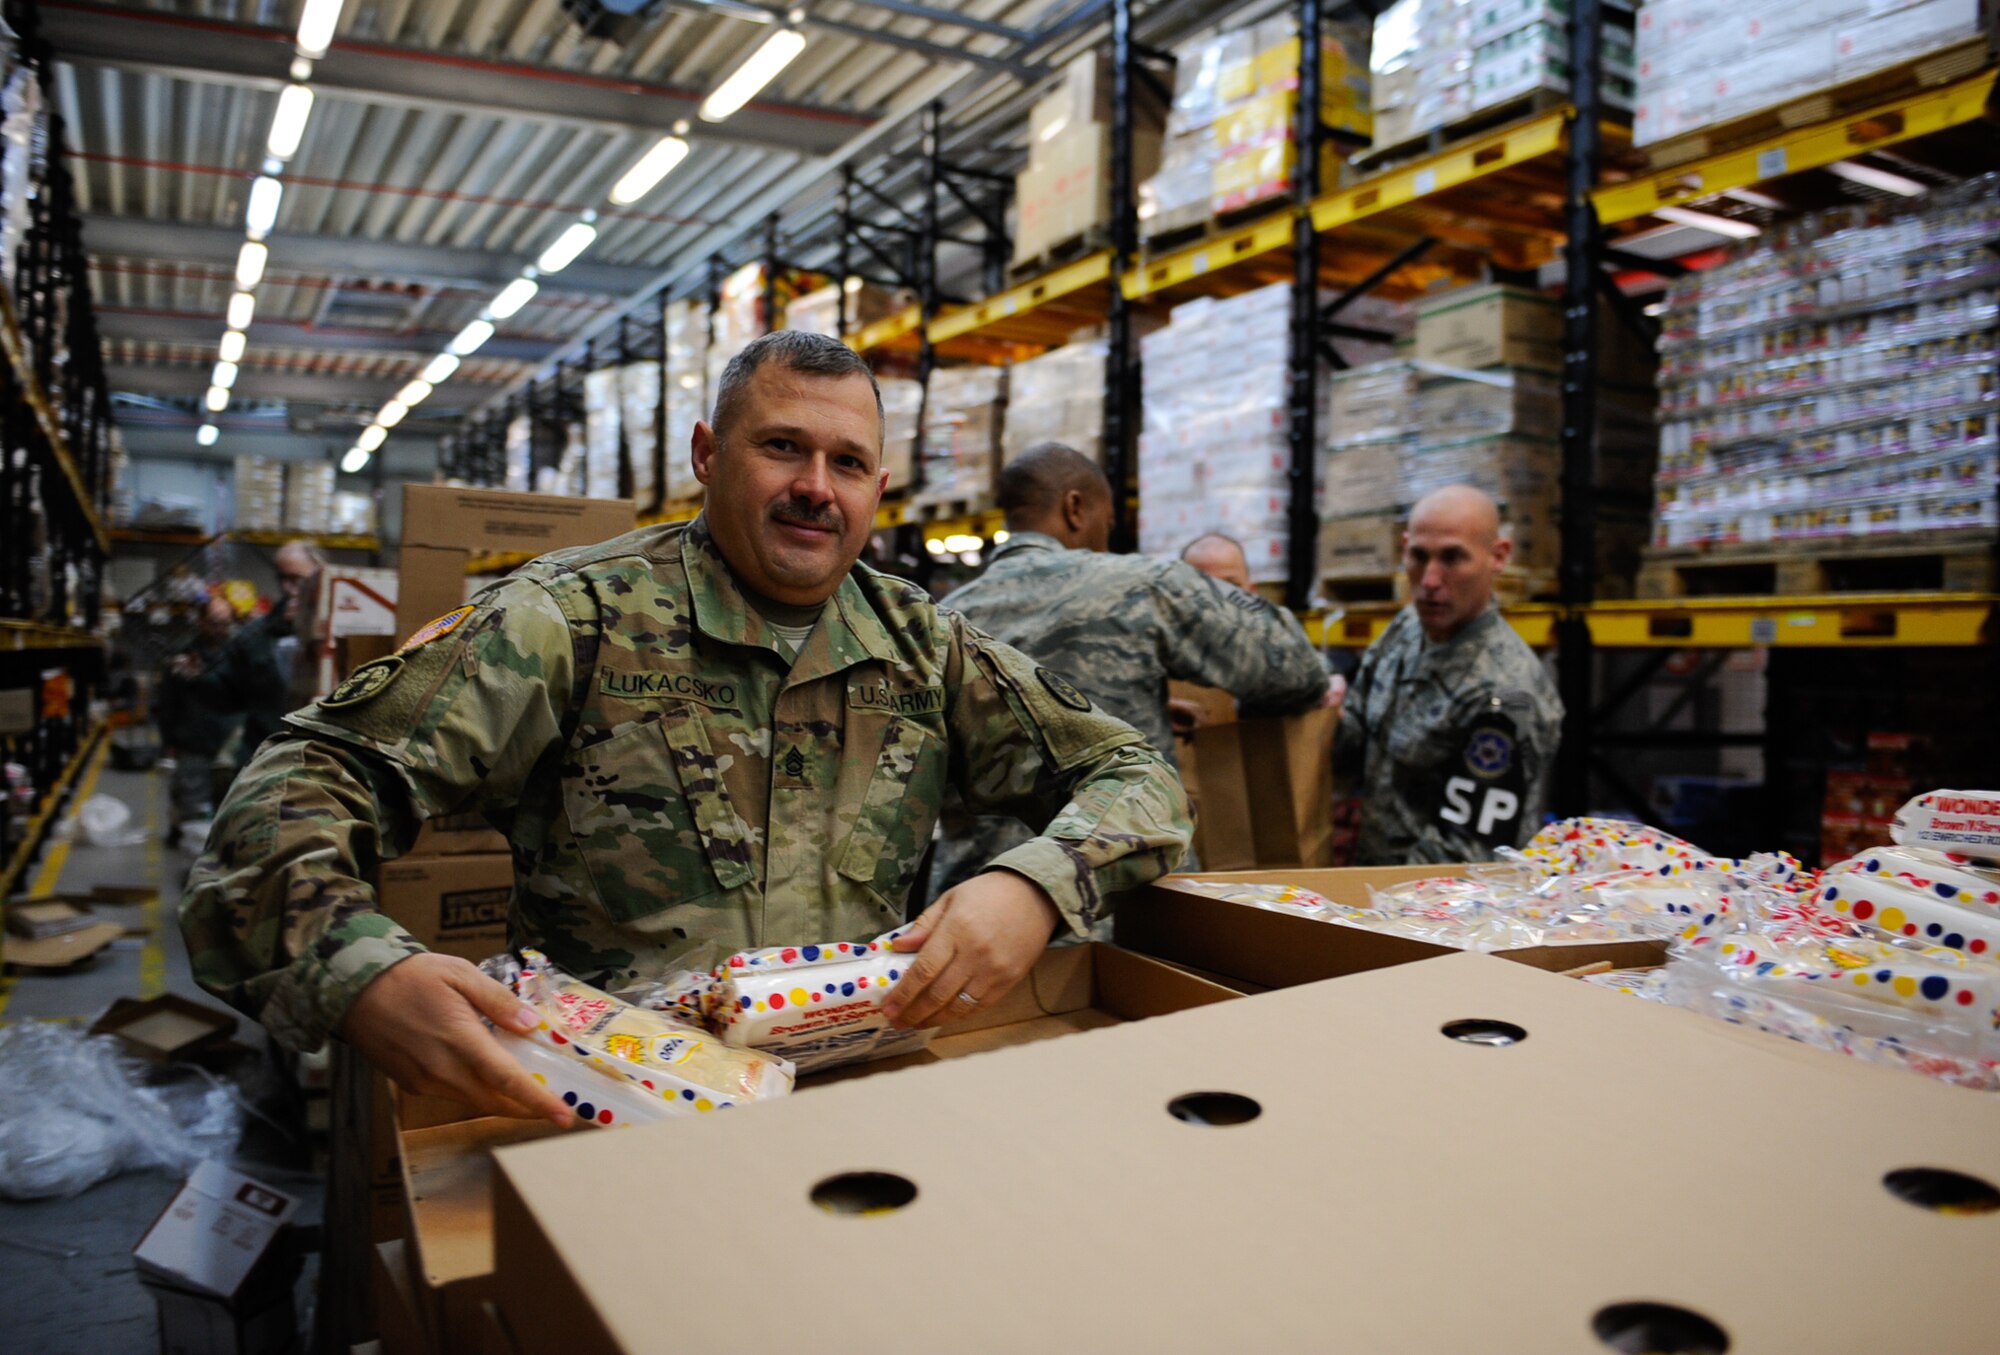 U.S. Army Sgt. 1st Class Jonathan Lukacsko, Public Health Activity-Rheinland Pfalz operations NCO, volunteers at the Thanks for Thanksgiving event at Vogelweh Air Base, Germany, Nov. 19, 2016. This year is the first time in 17 years the Army and the Air Force have collaborated for Thanks for Thanksgiving, creating more than 660 meals for military families.  (U.S. Air Force photo by Airman 1st Class Savannah L. Waters)